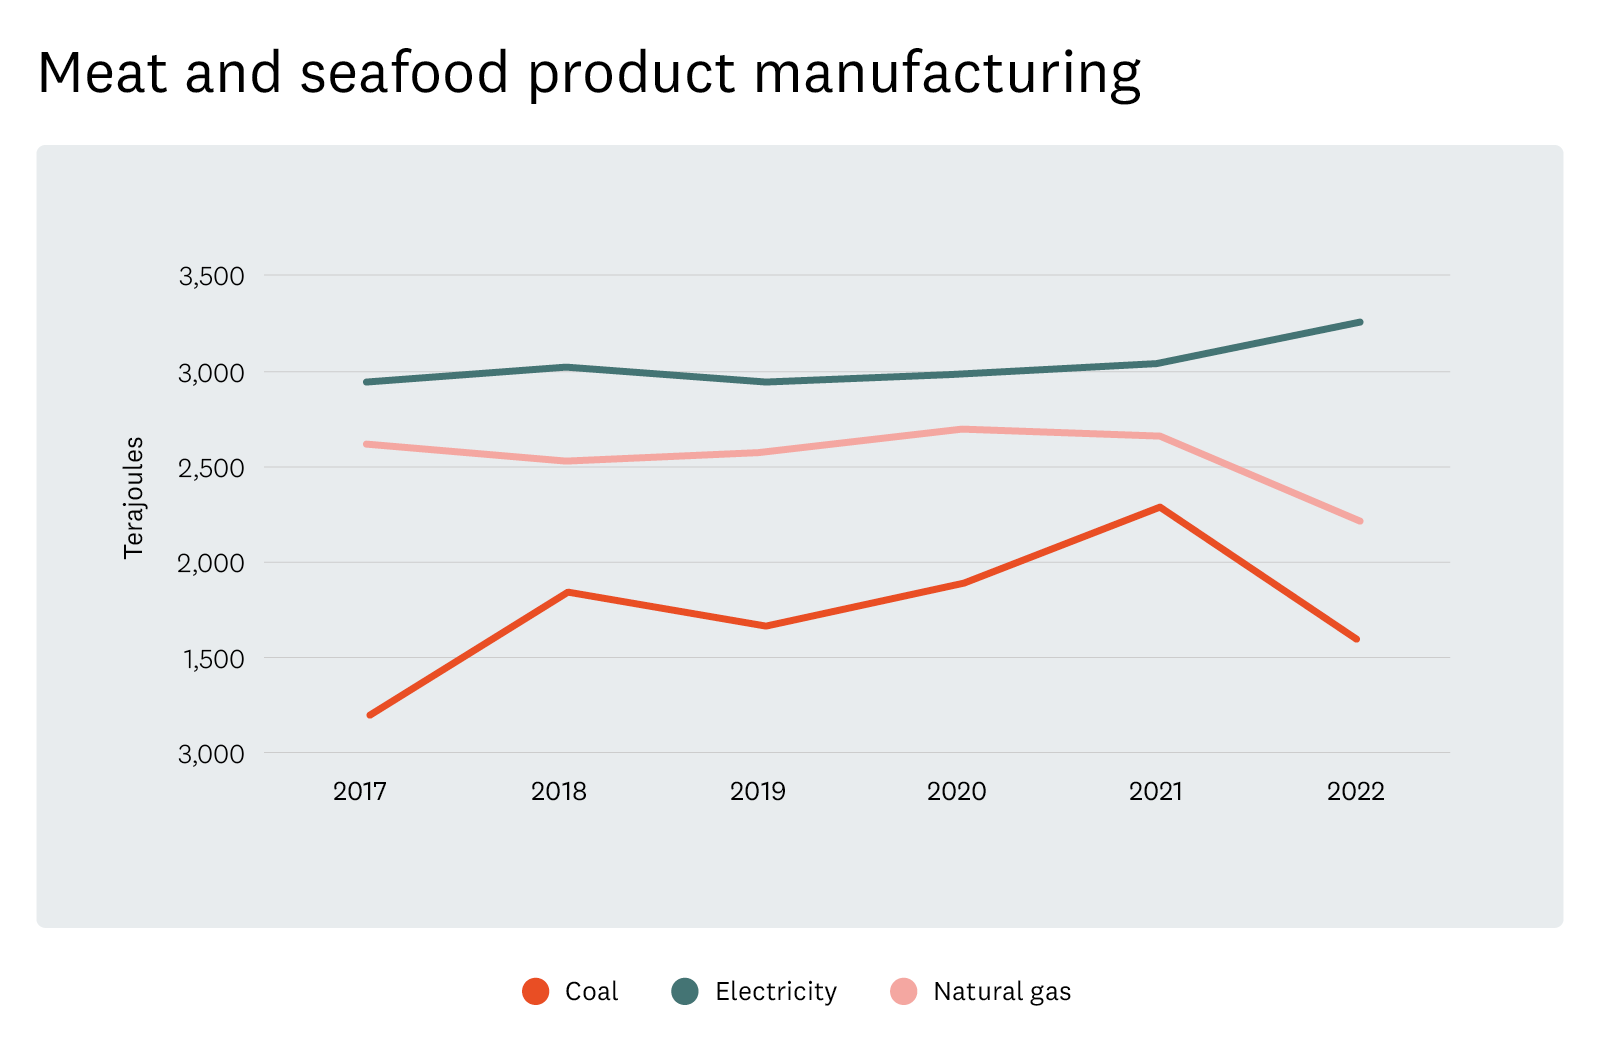 Meat and seafood product manufacturing - Stationery energy consumption. 